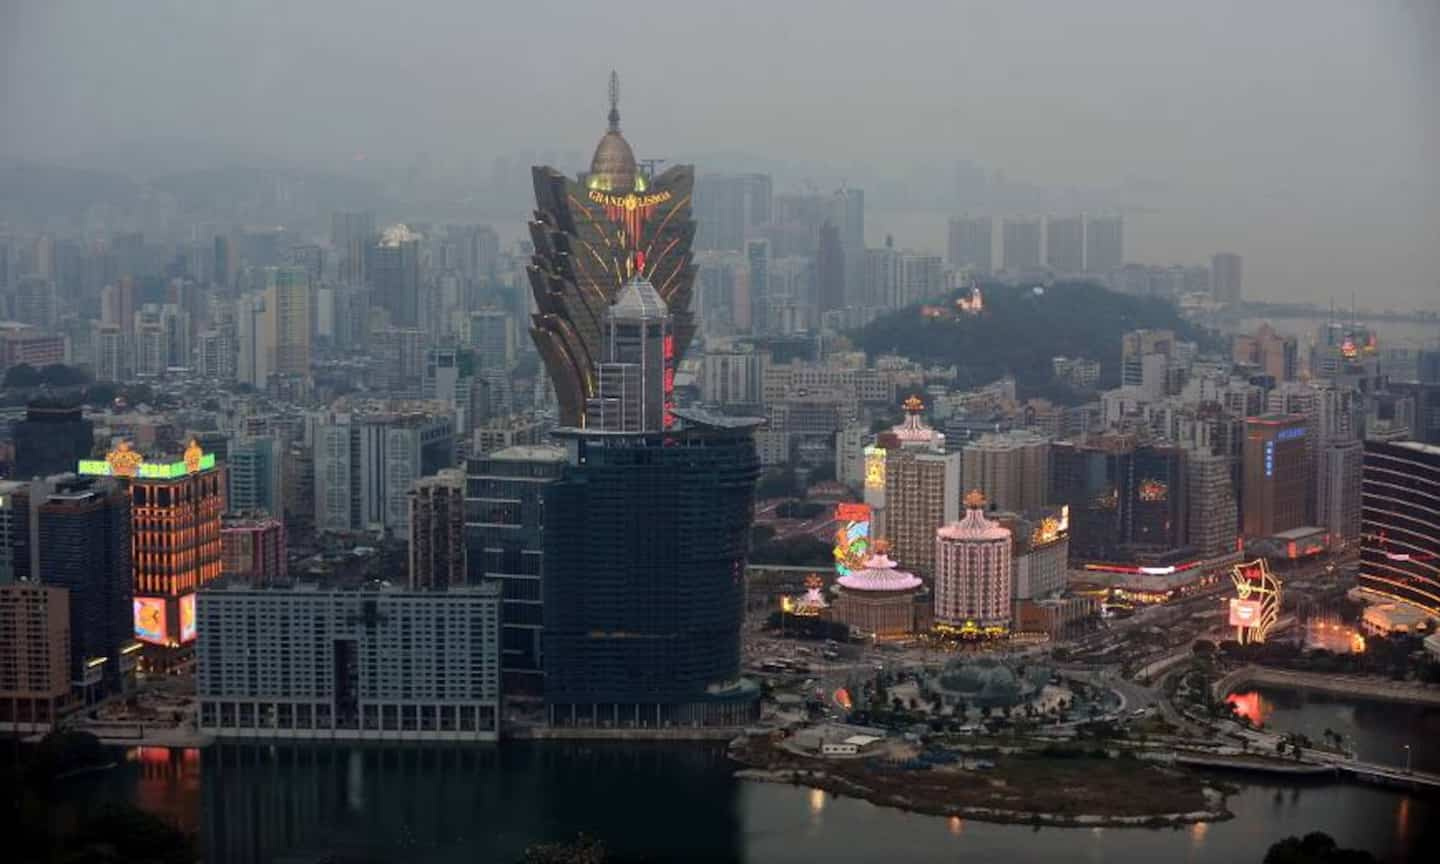 In the midst of the wave of Covid, Macau closes its casinos and non-essential businesses